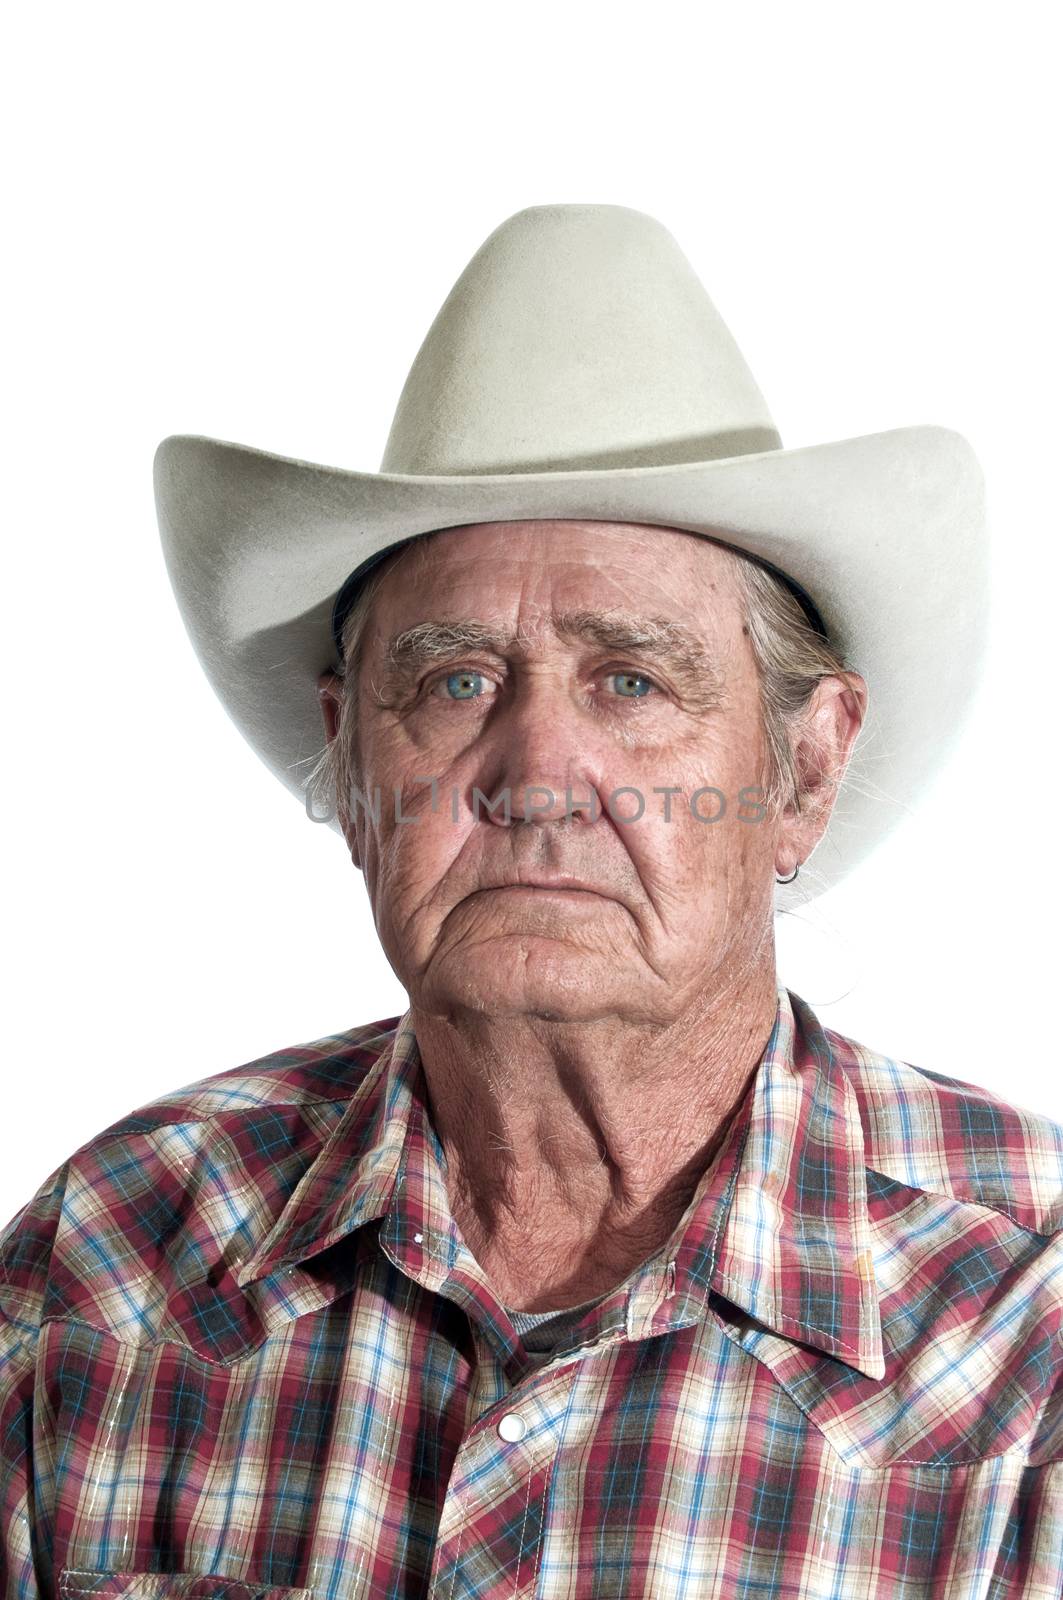 Cowboy with the years of experience written in the lines of his face.